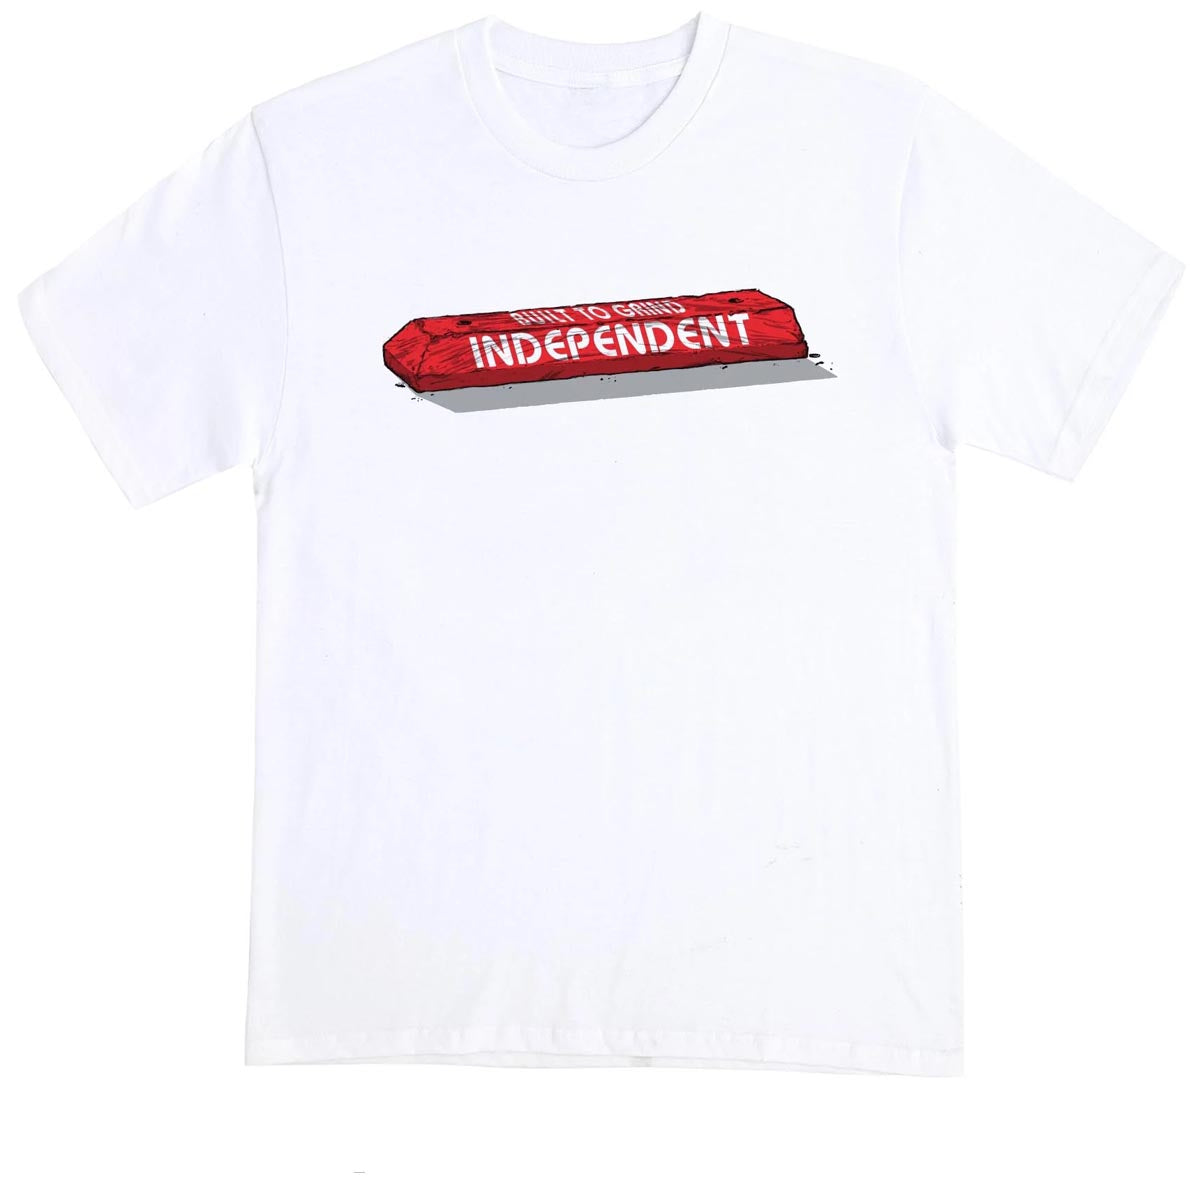 Independent BTG Curb T-Shirt - White image 1